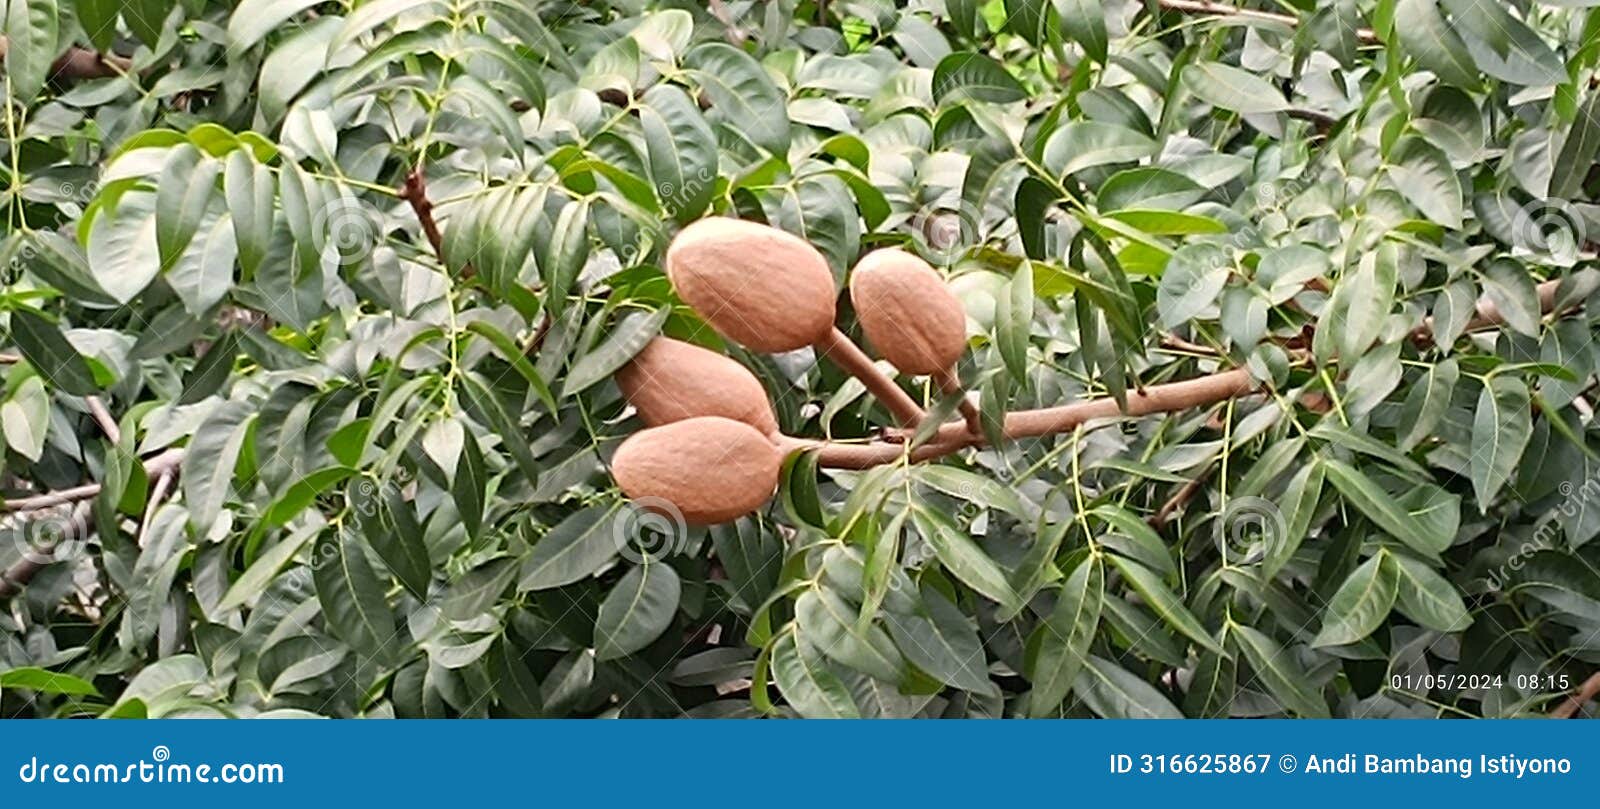 mahogany trees are obtained from the active ingredients contained in mahogany seeds such as flavonoids